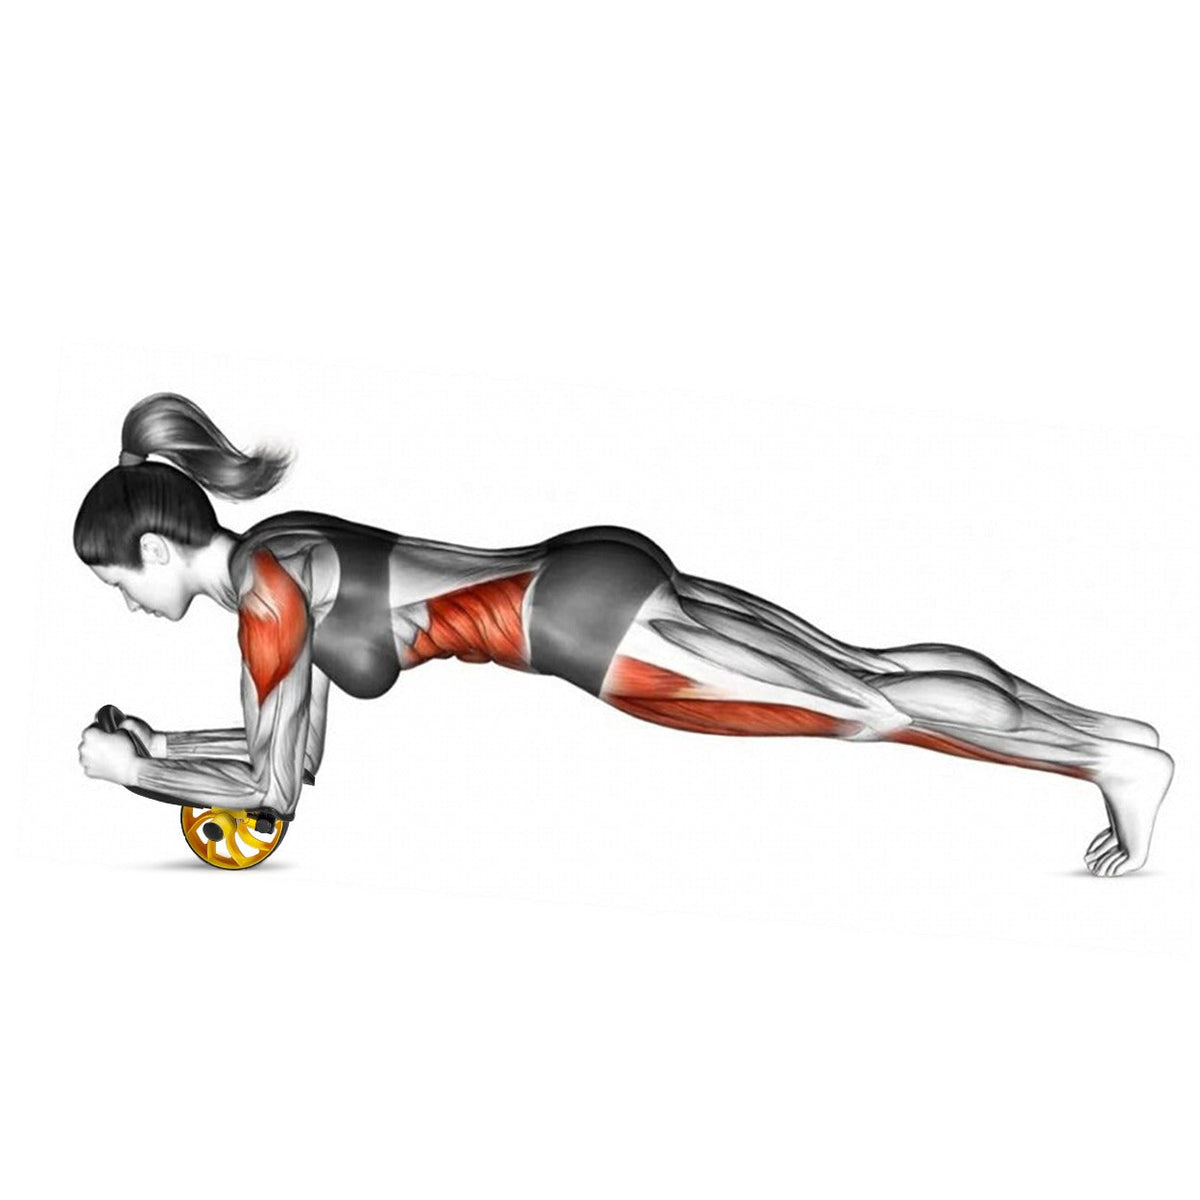 PumpinPro - Advanced Ab Roller System: 12-in-1 Workout Device with Detachable Elbow Support for Optimal Performance